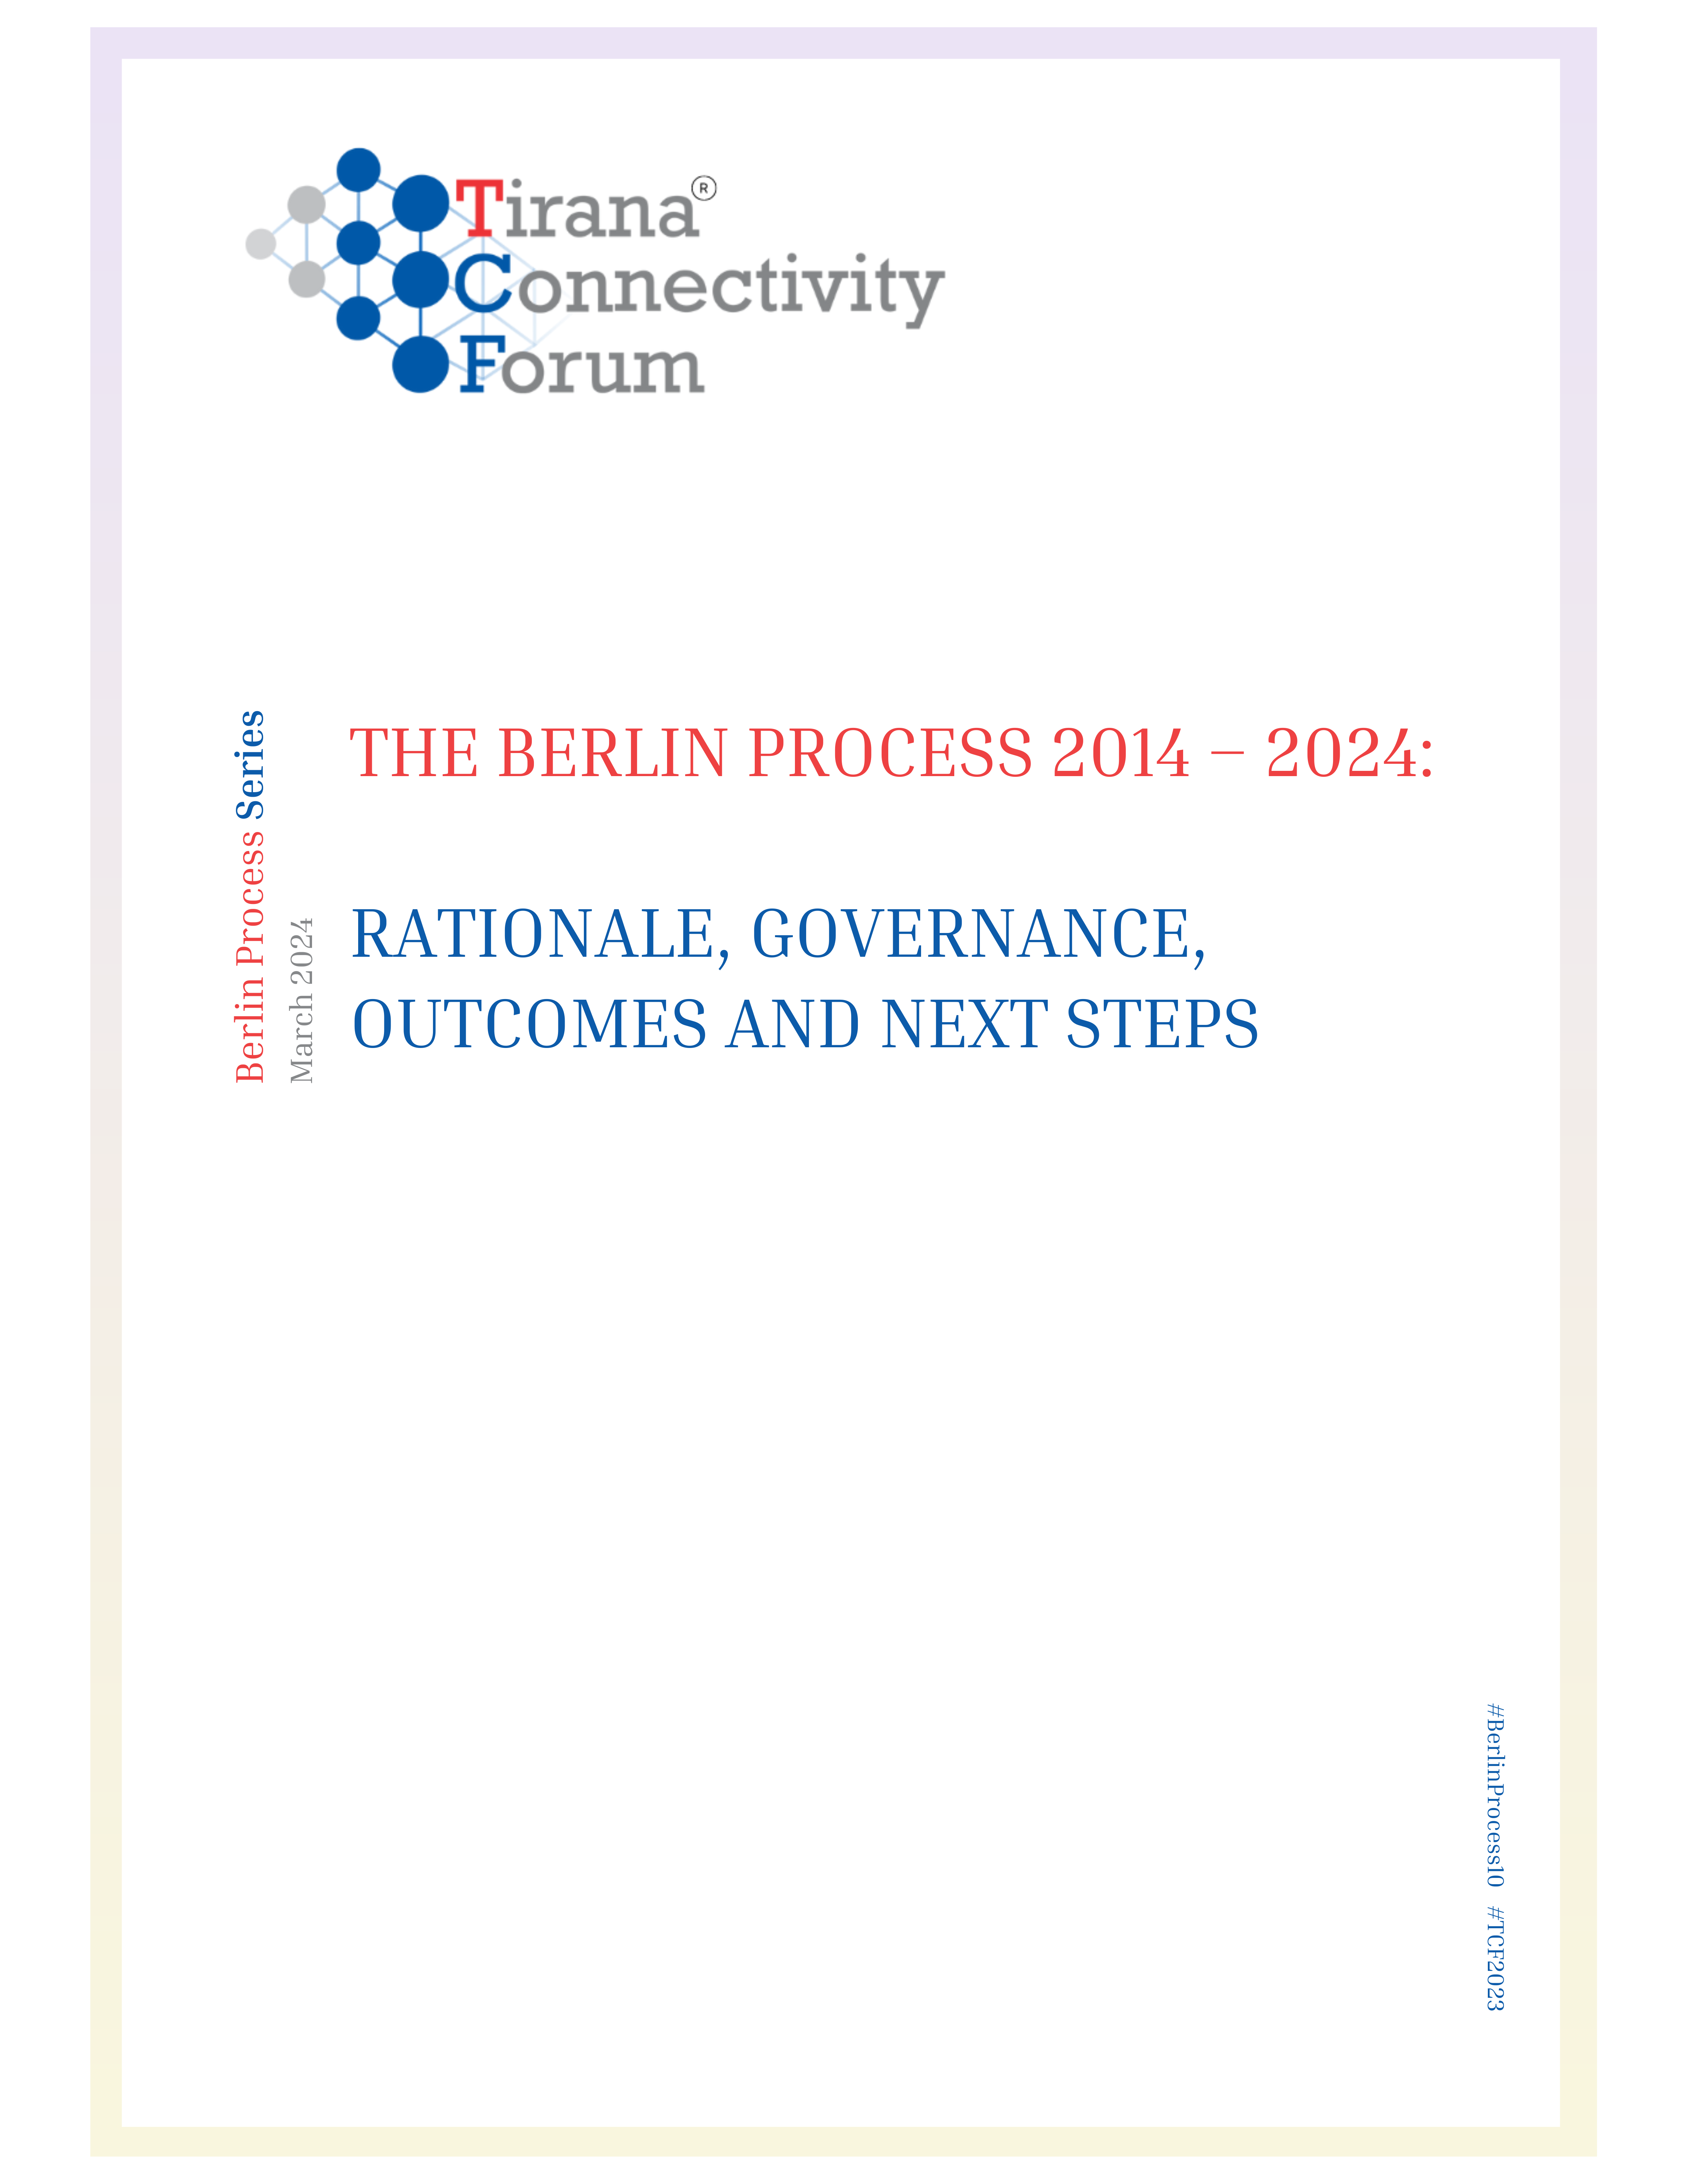 The Berlin Process 2014 – 2024: Rationale, Governance, Outcomes and Next Steps